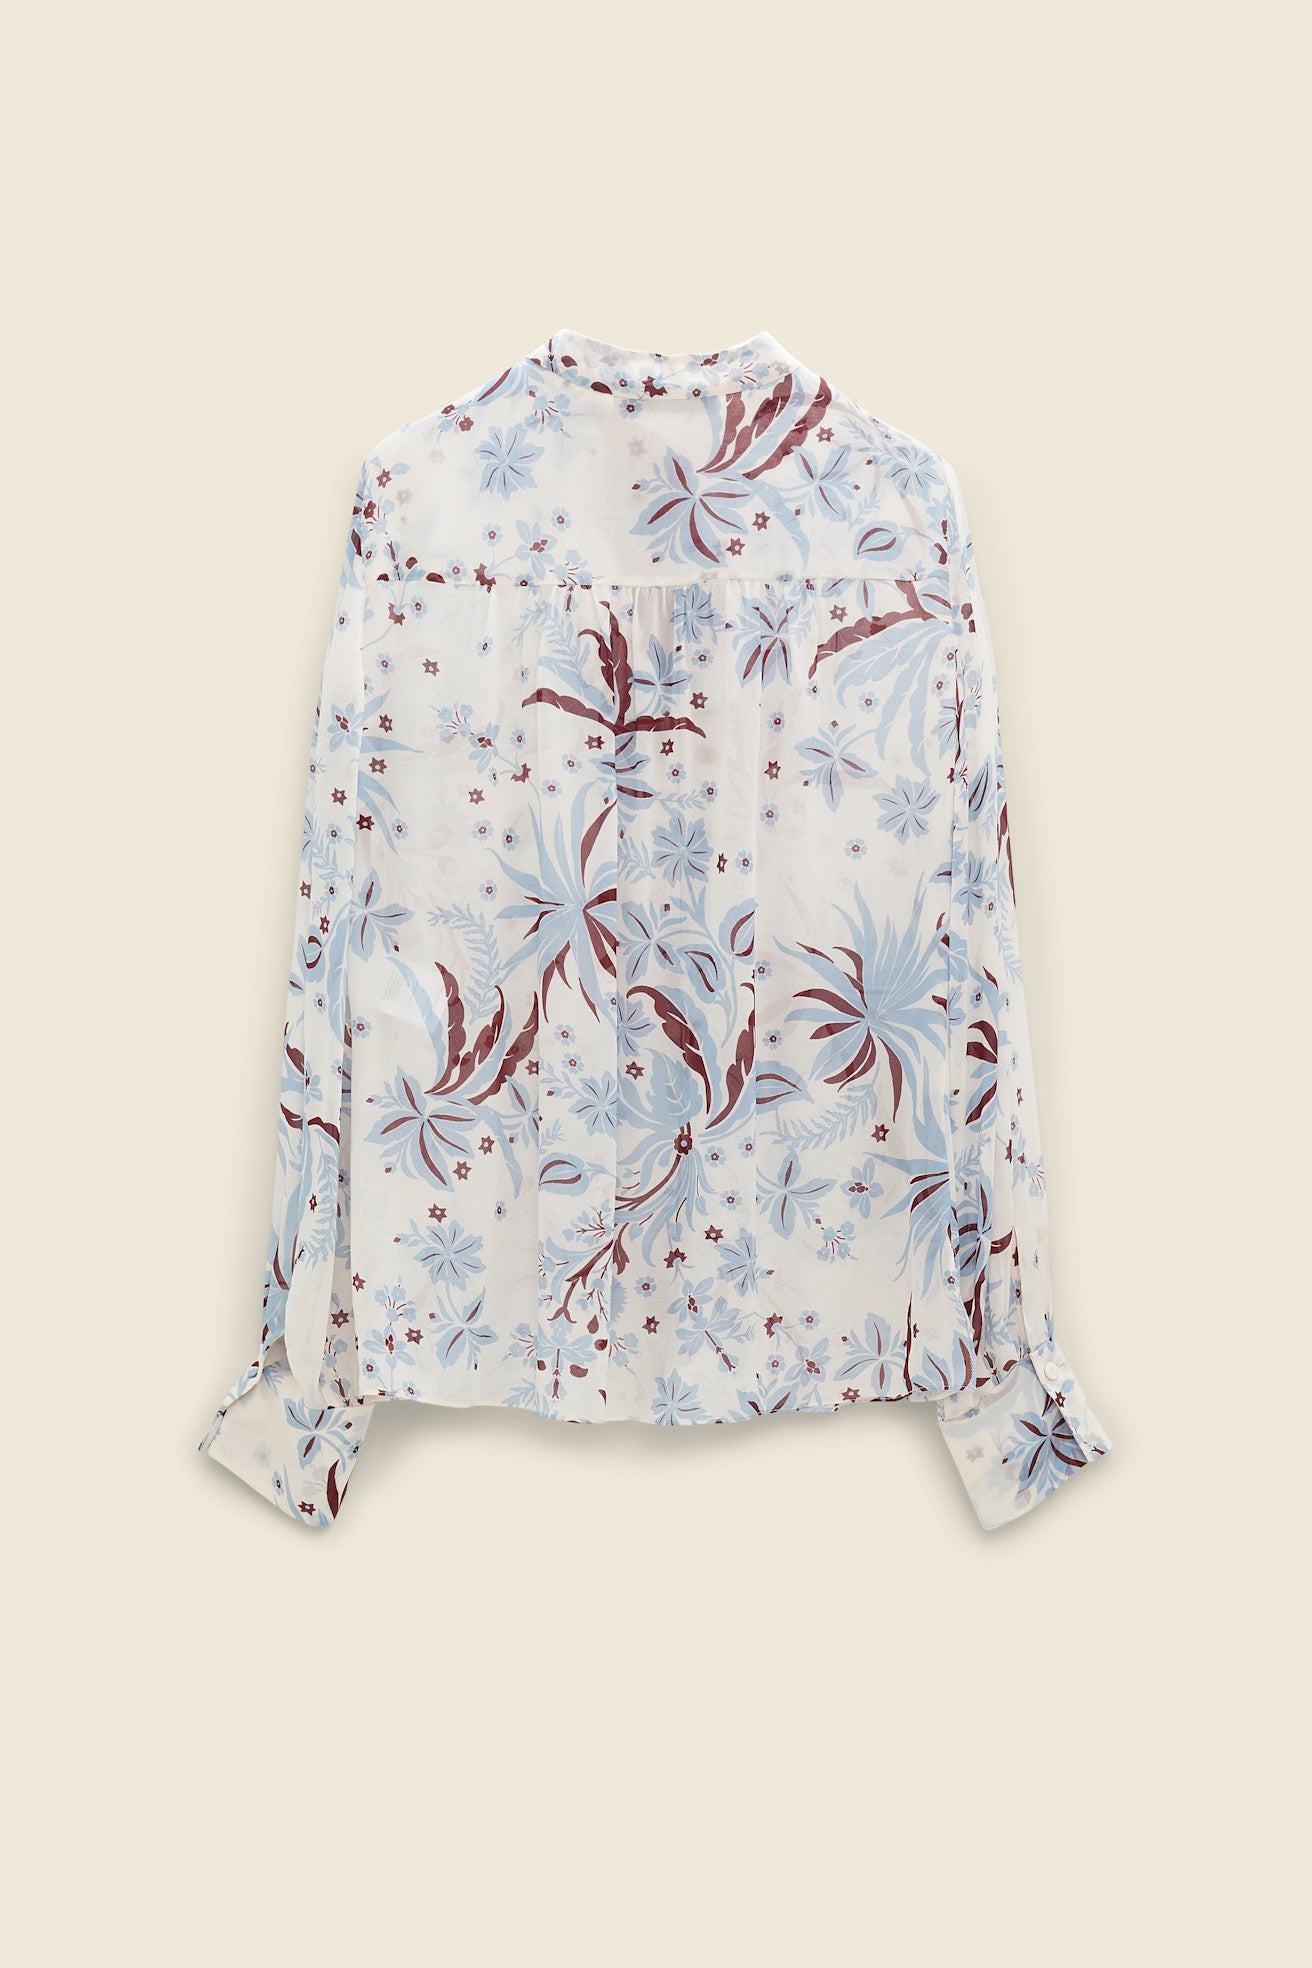 Blooming blend blouse by Dorothee Schumacher